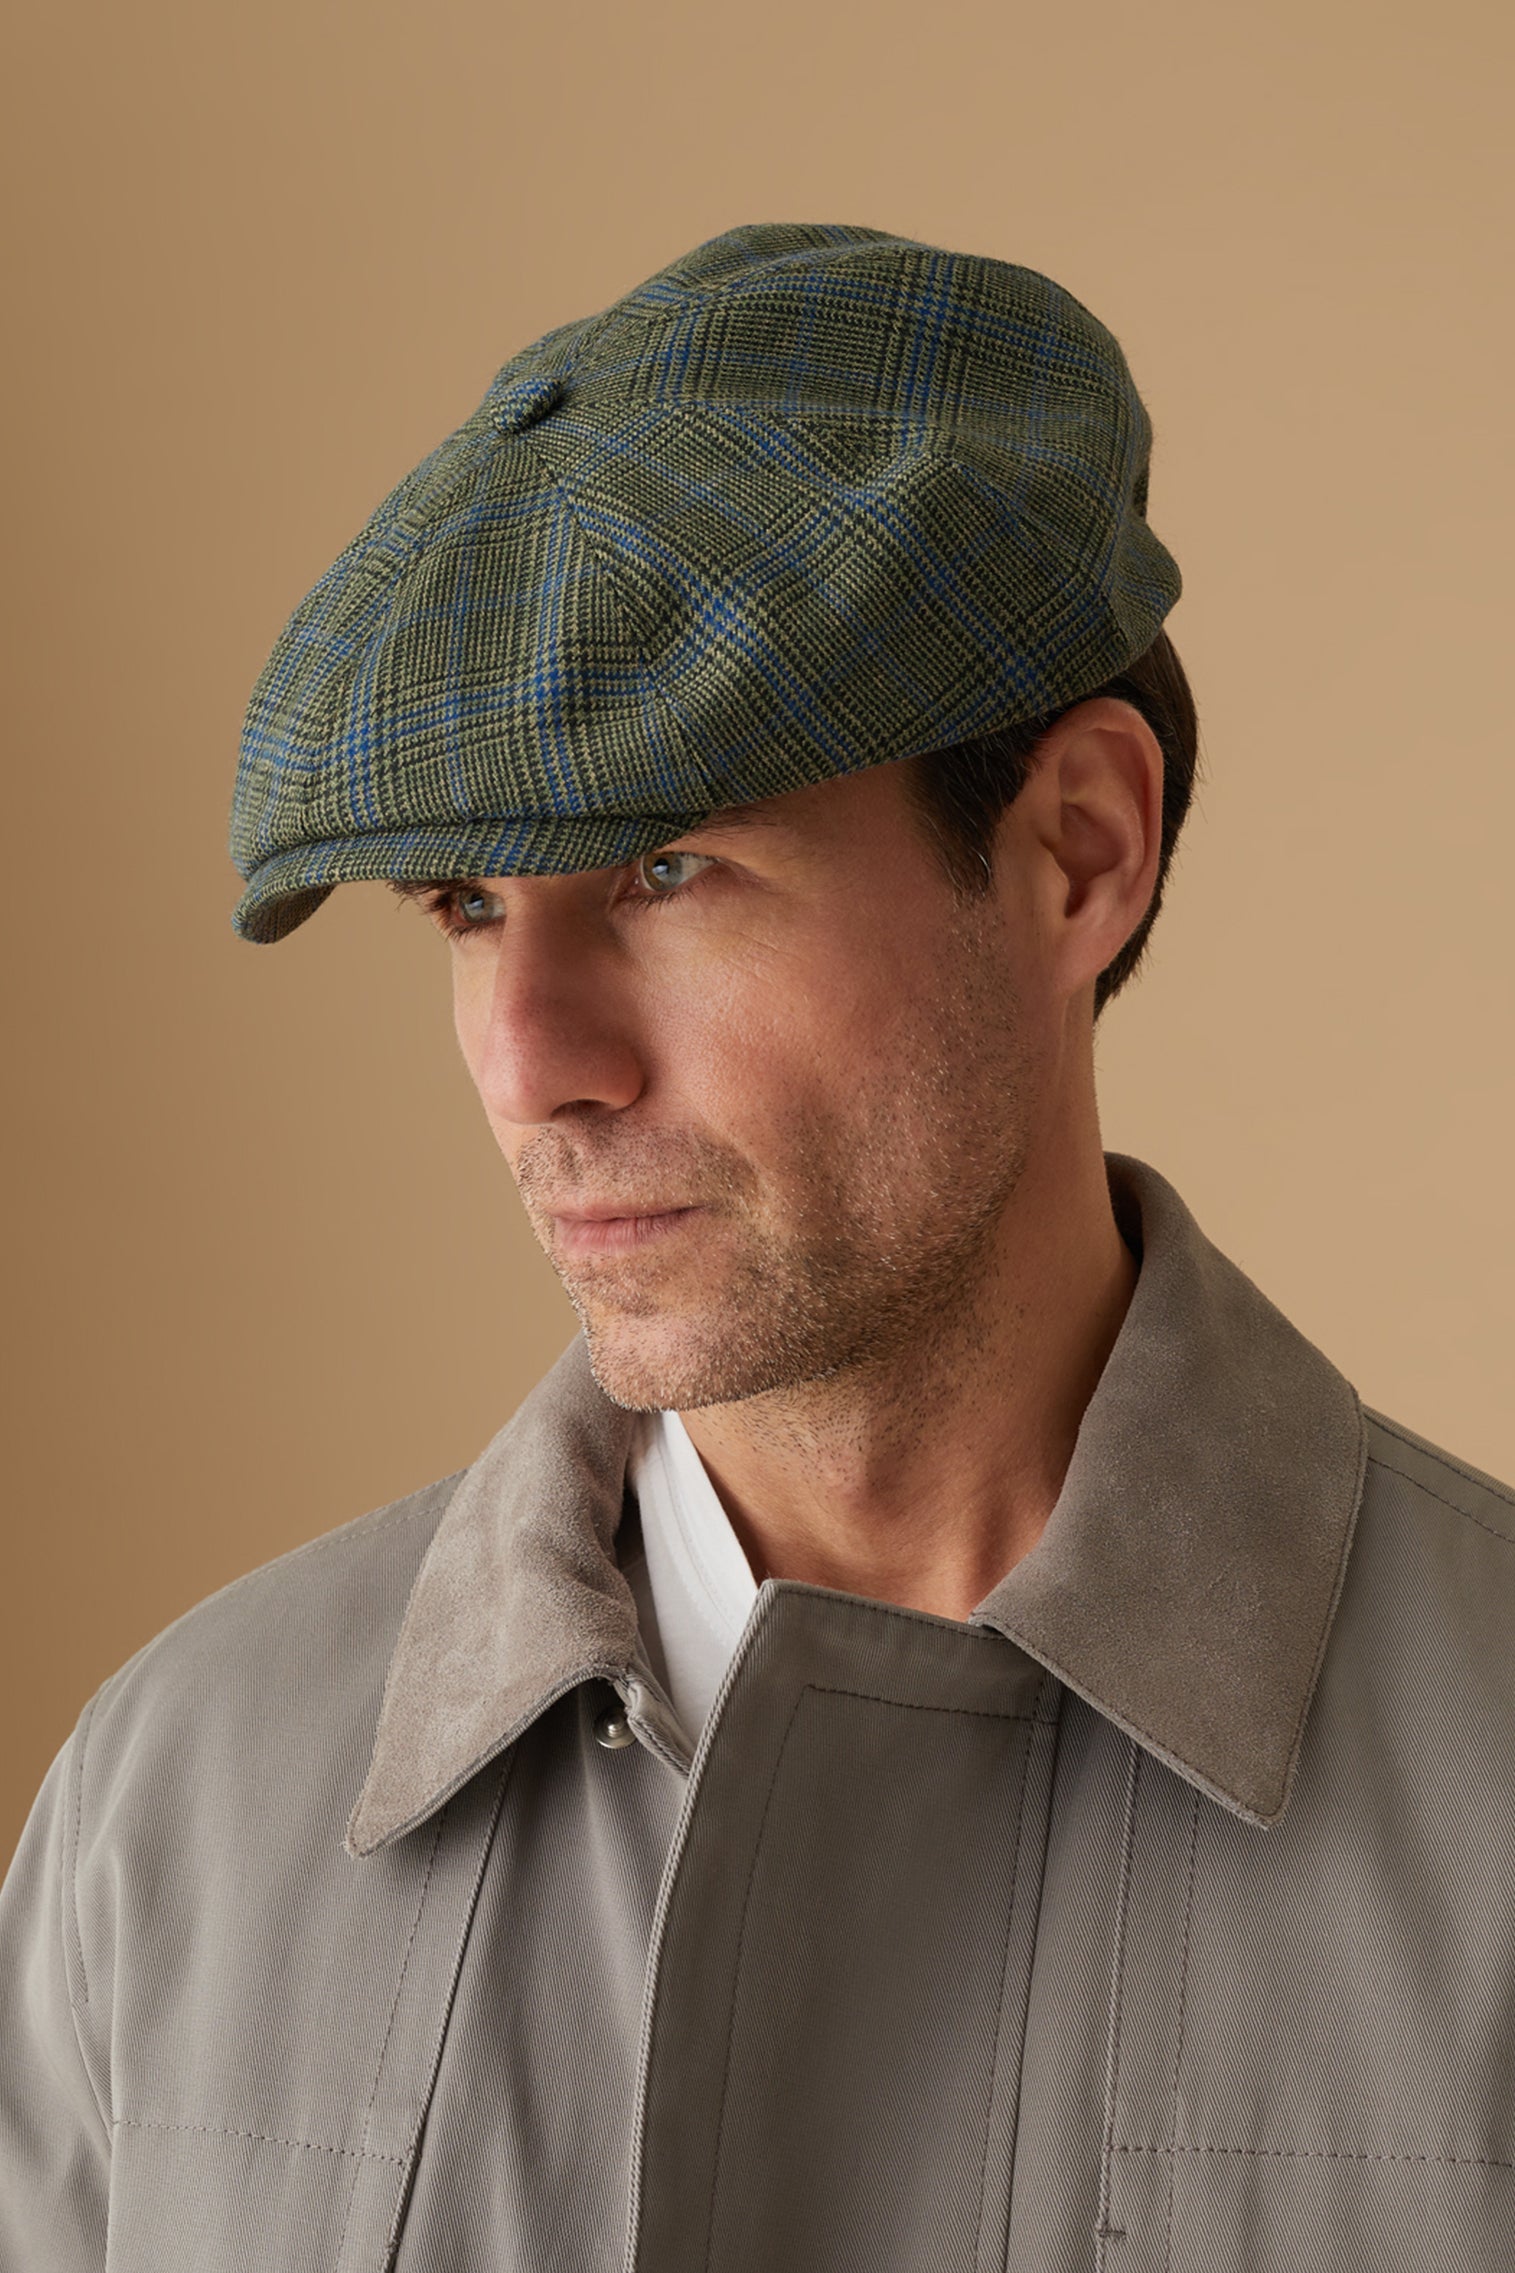 Highgrove Green Bakerboy Cap - Hats for Oval Face Shapes - Lock & Co. Hatters London UK